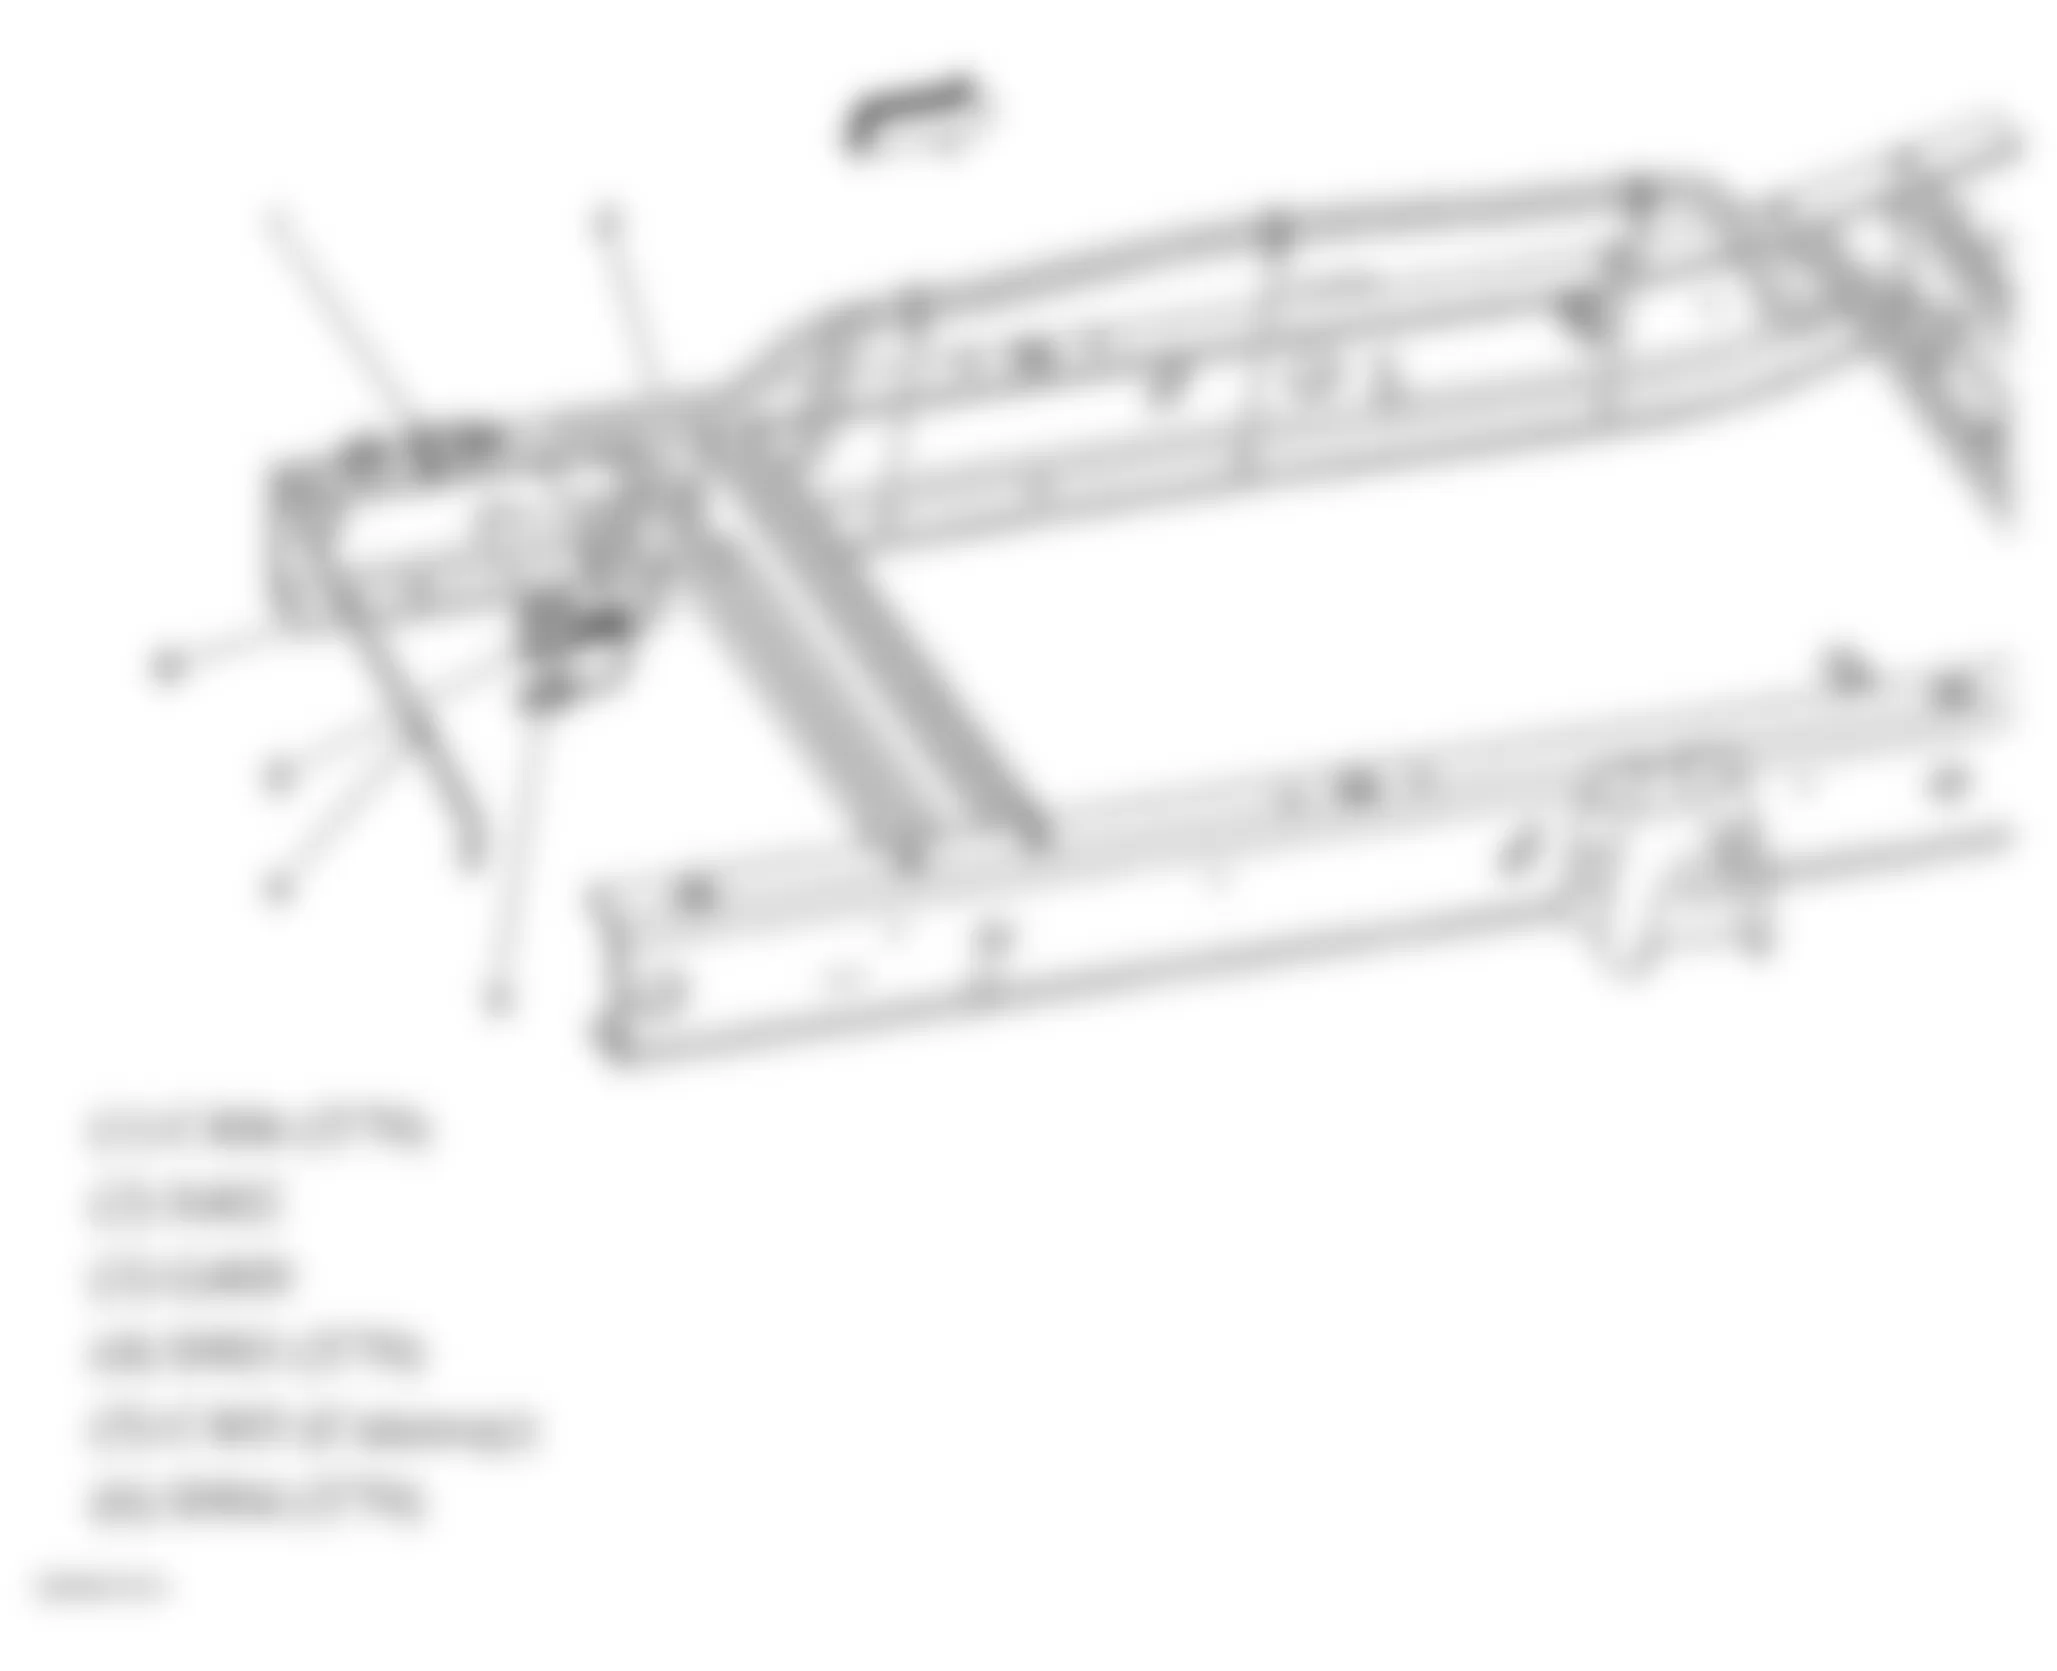 GMC Savana H1500 2009 - Component Locations -  Rear Chassis (Cutaway)